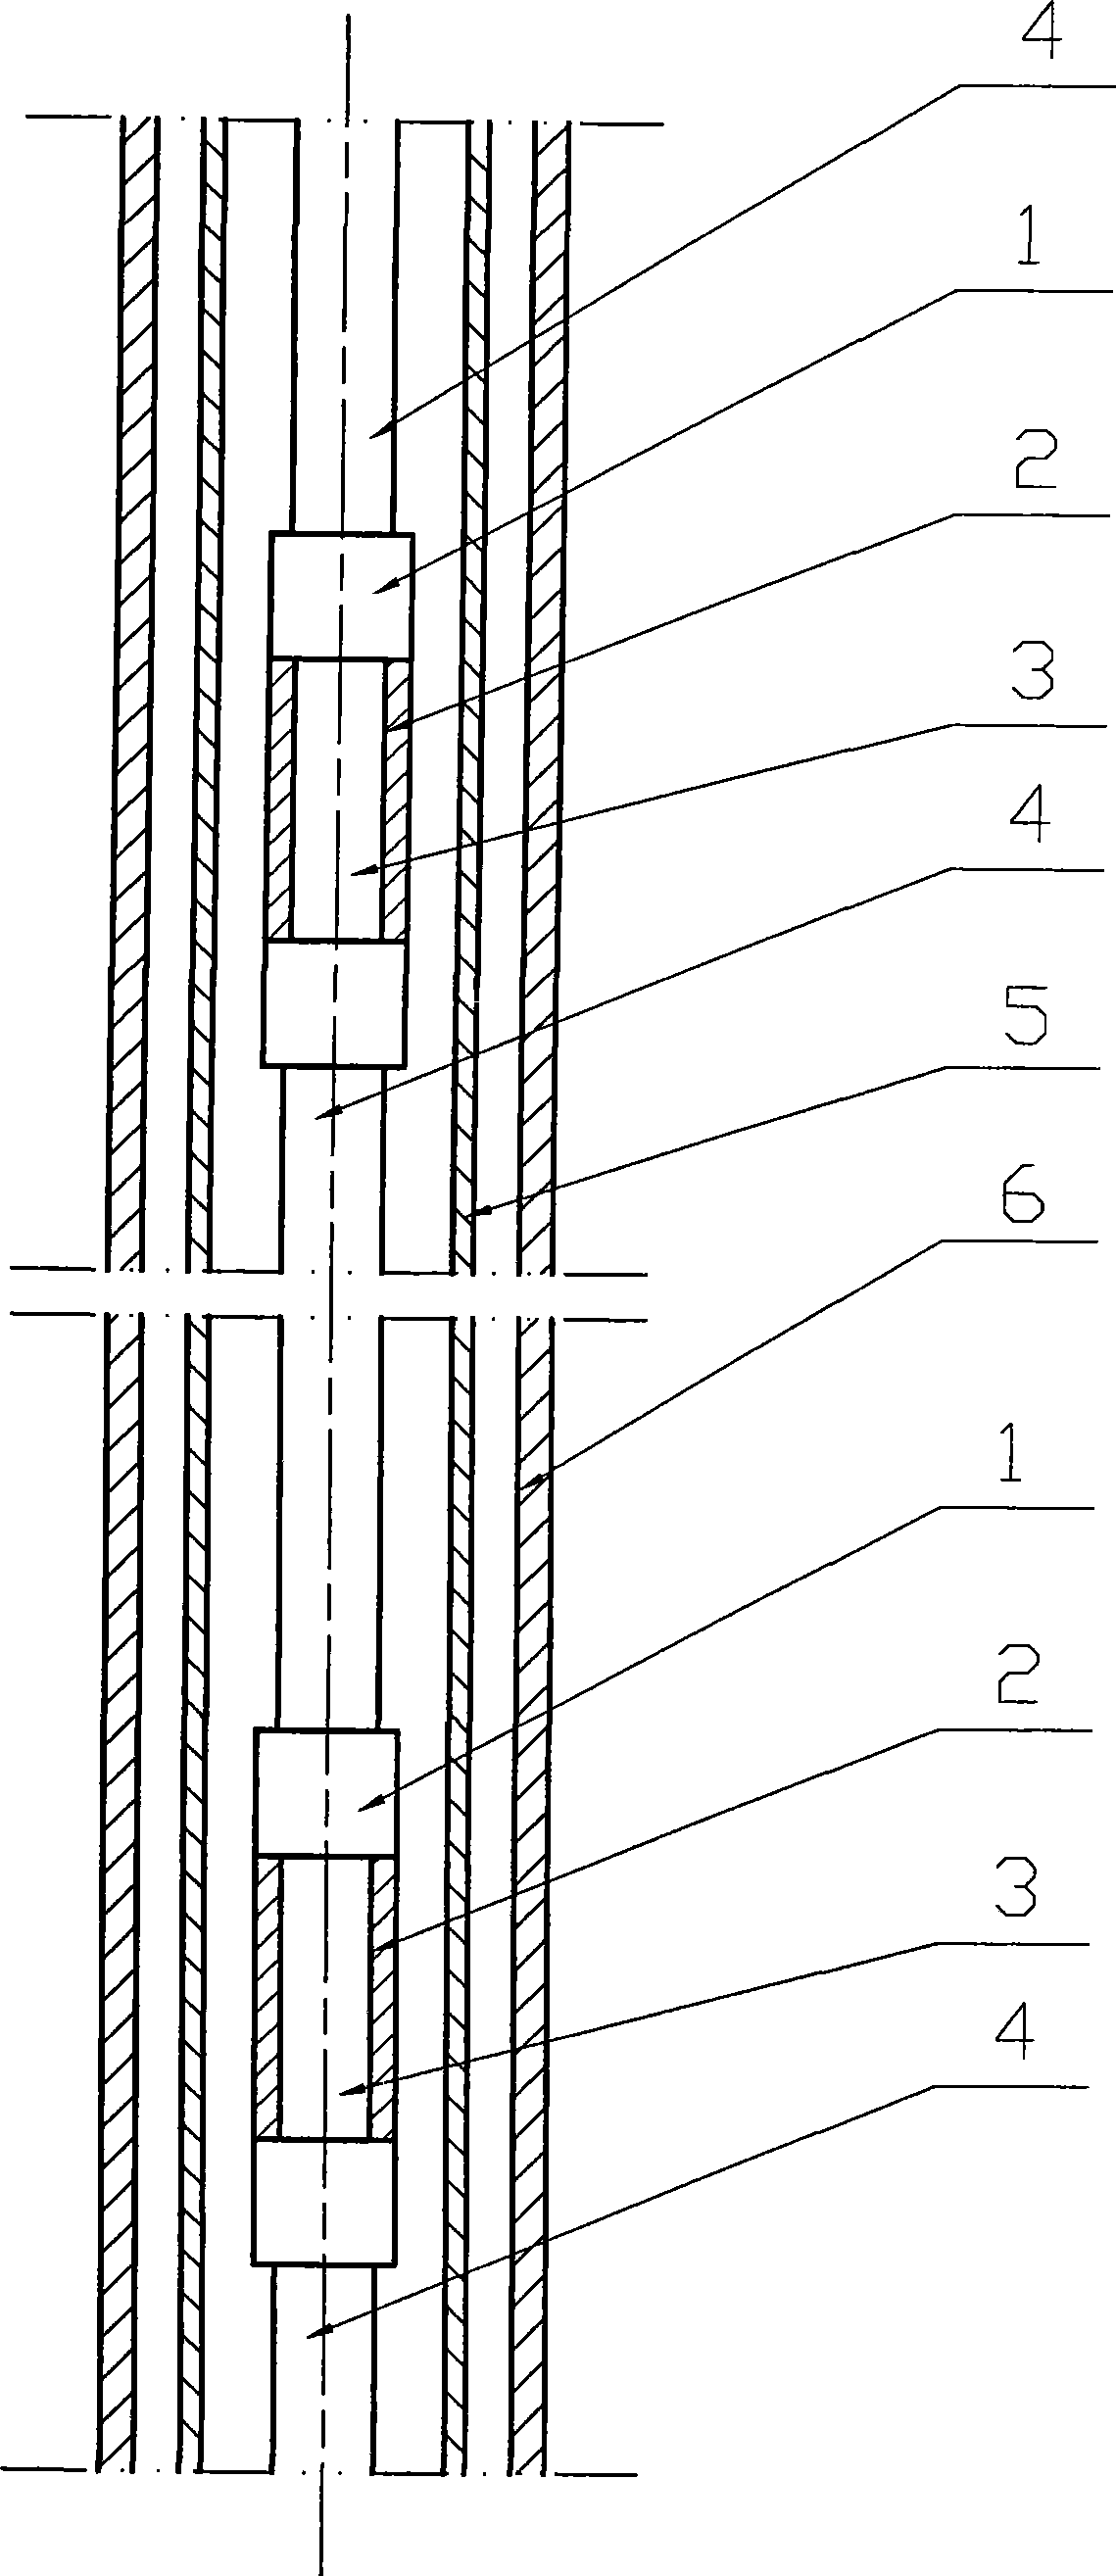 Sacrificial anode and protective cathode-pumping rod anti-corrosive apparatus